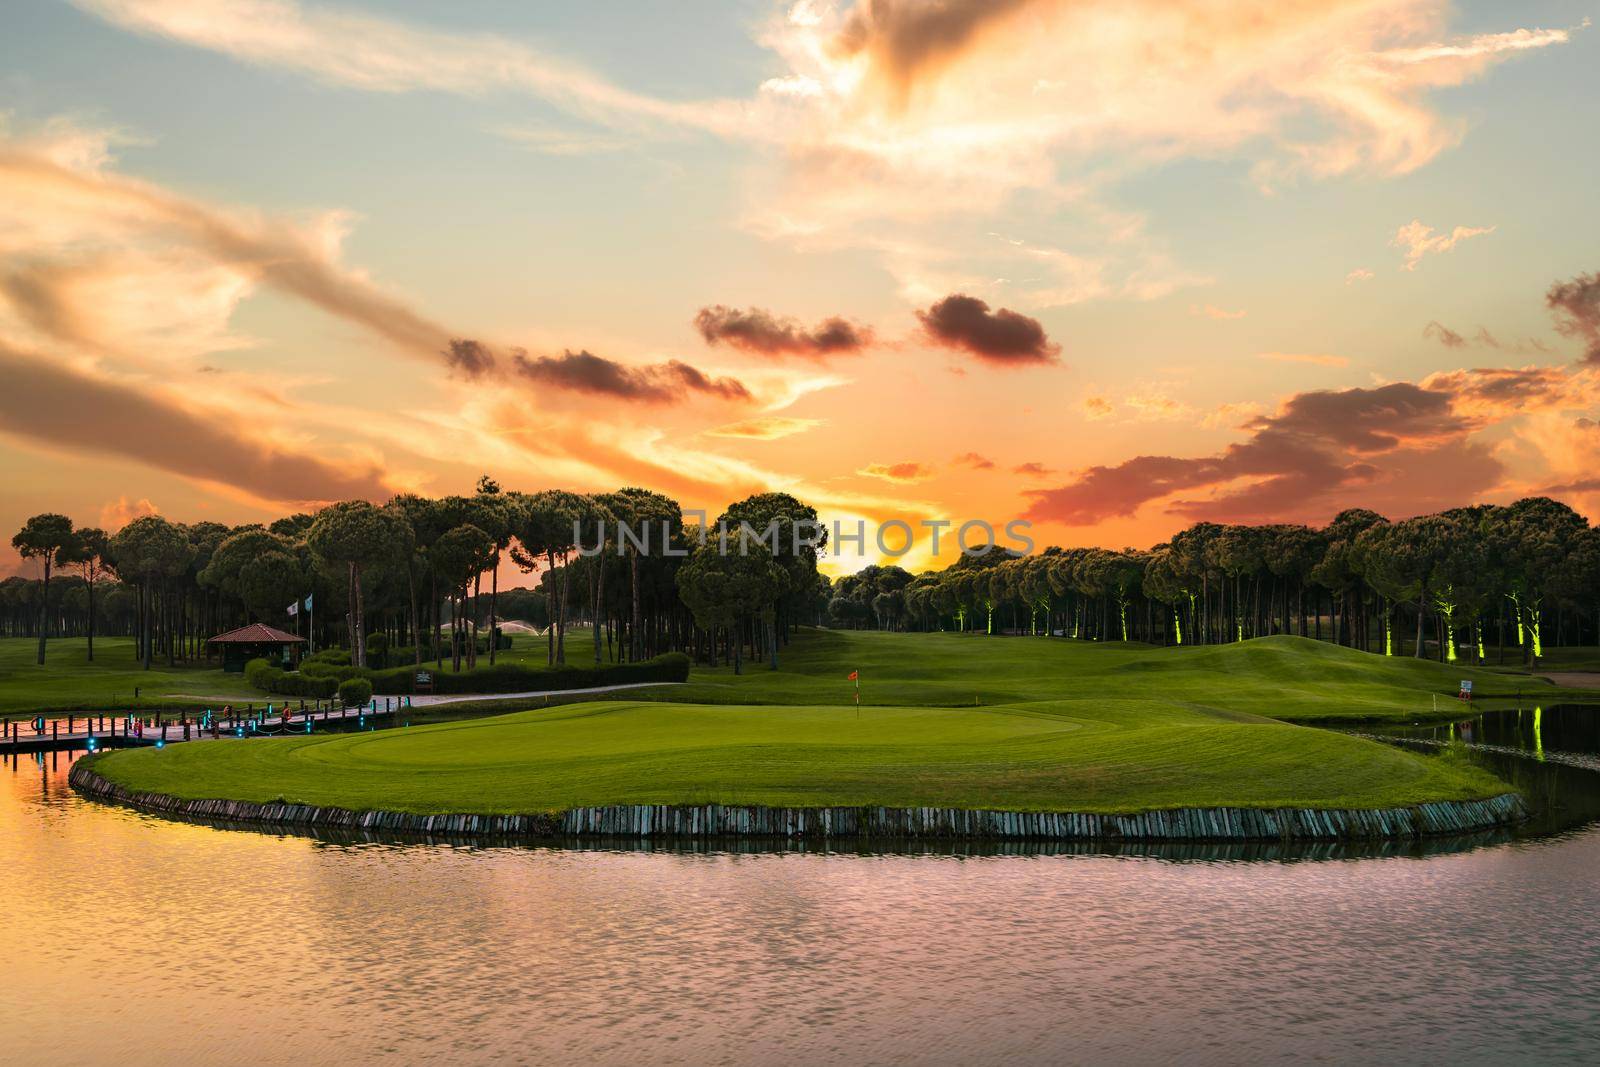 Sunset at the golf course. Scenic panoramic view of a golf fairway